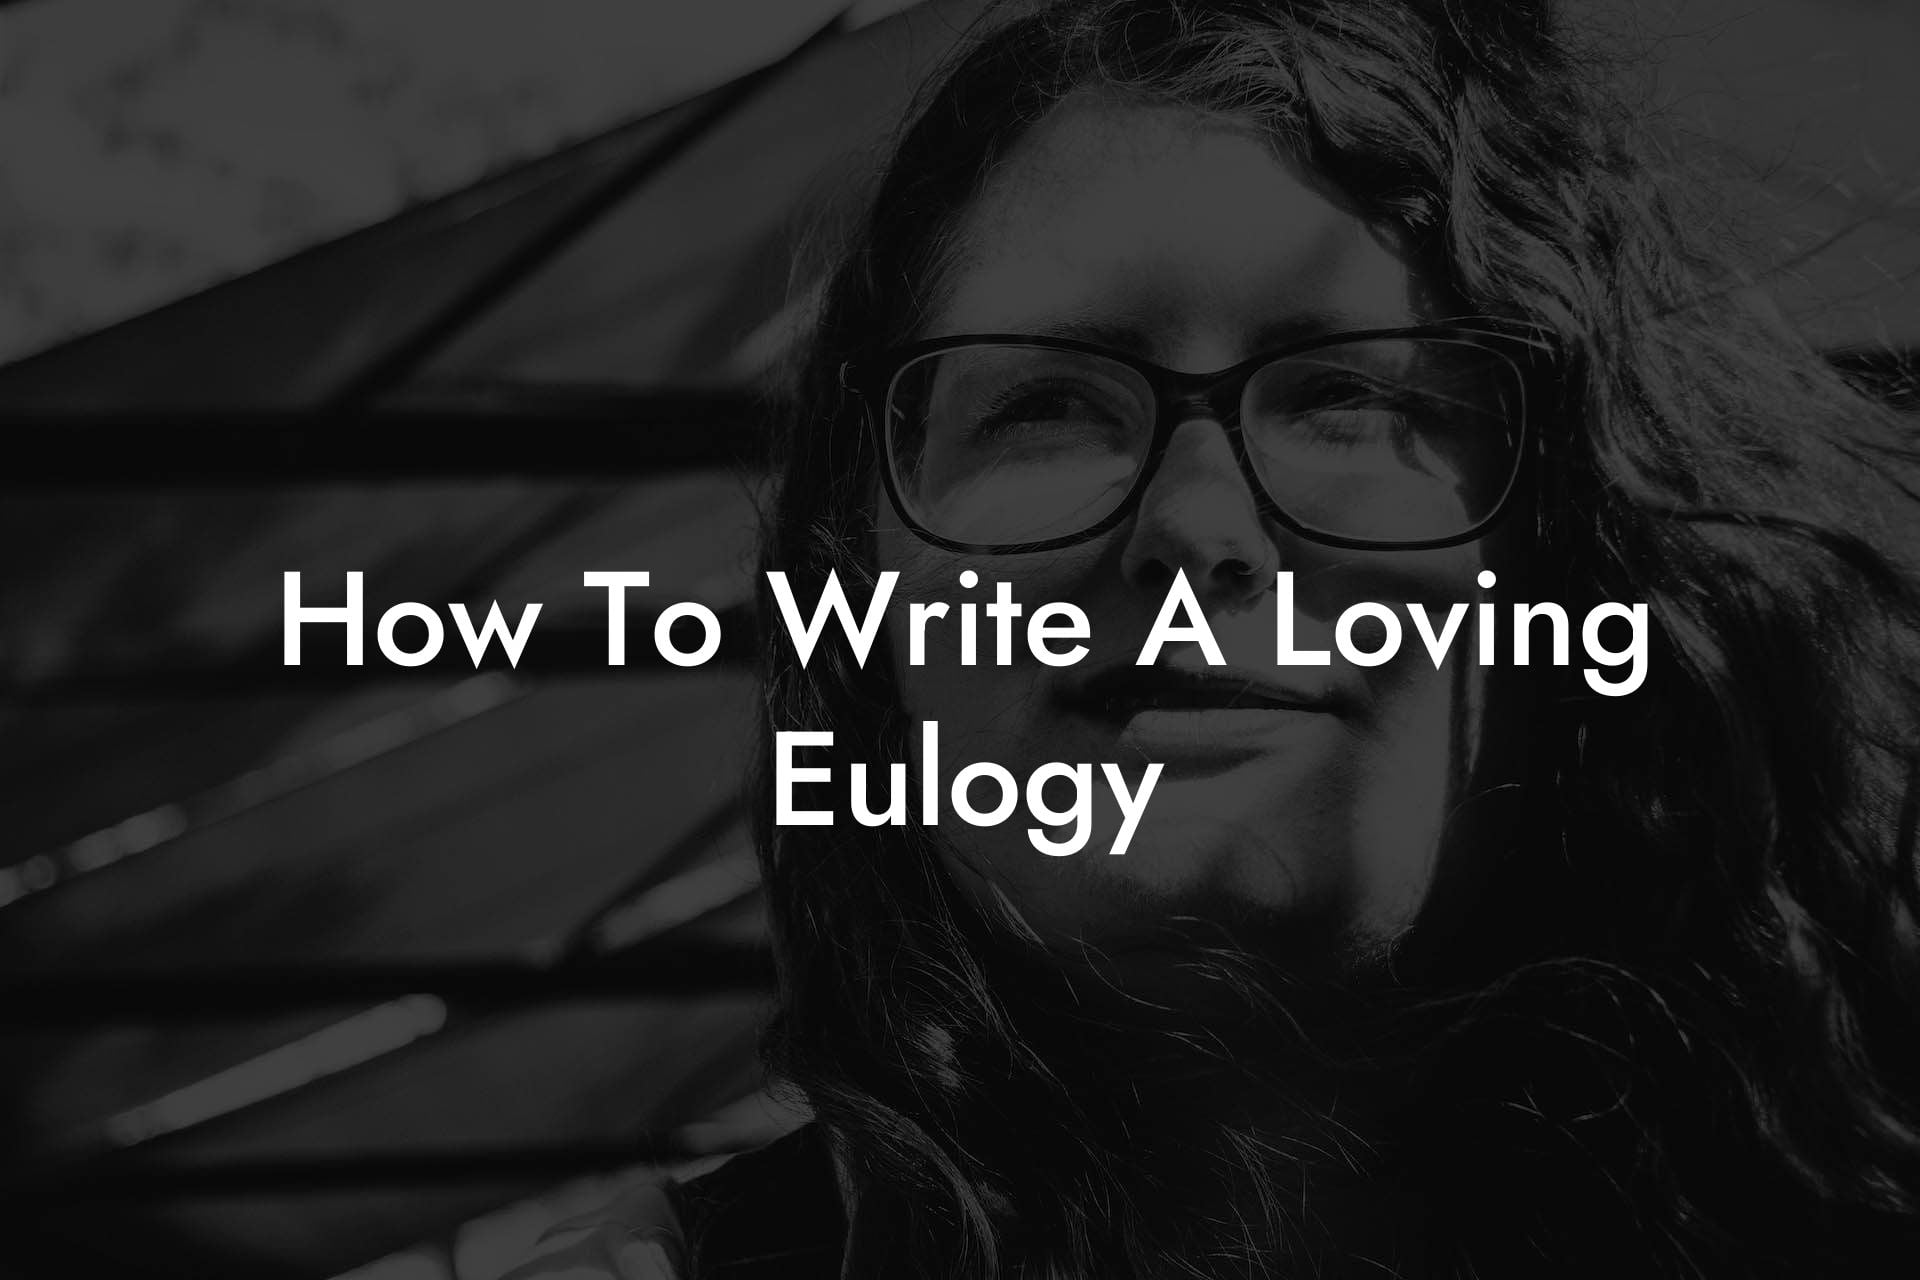 How To Write A Loving Eulogy